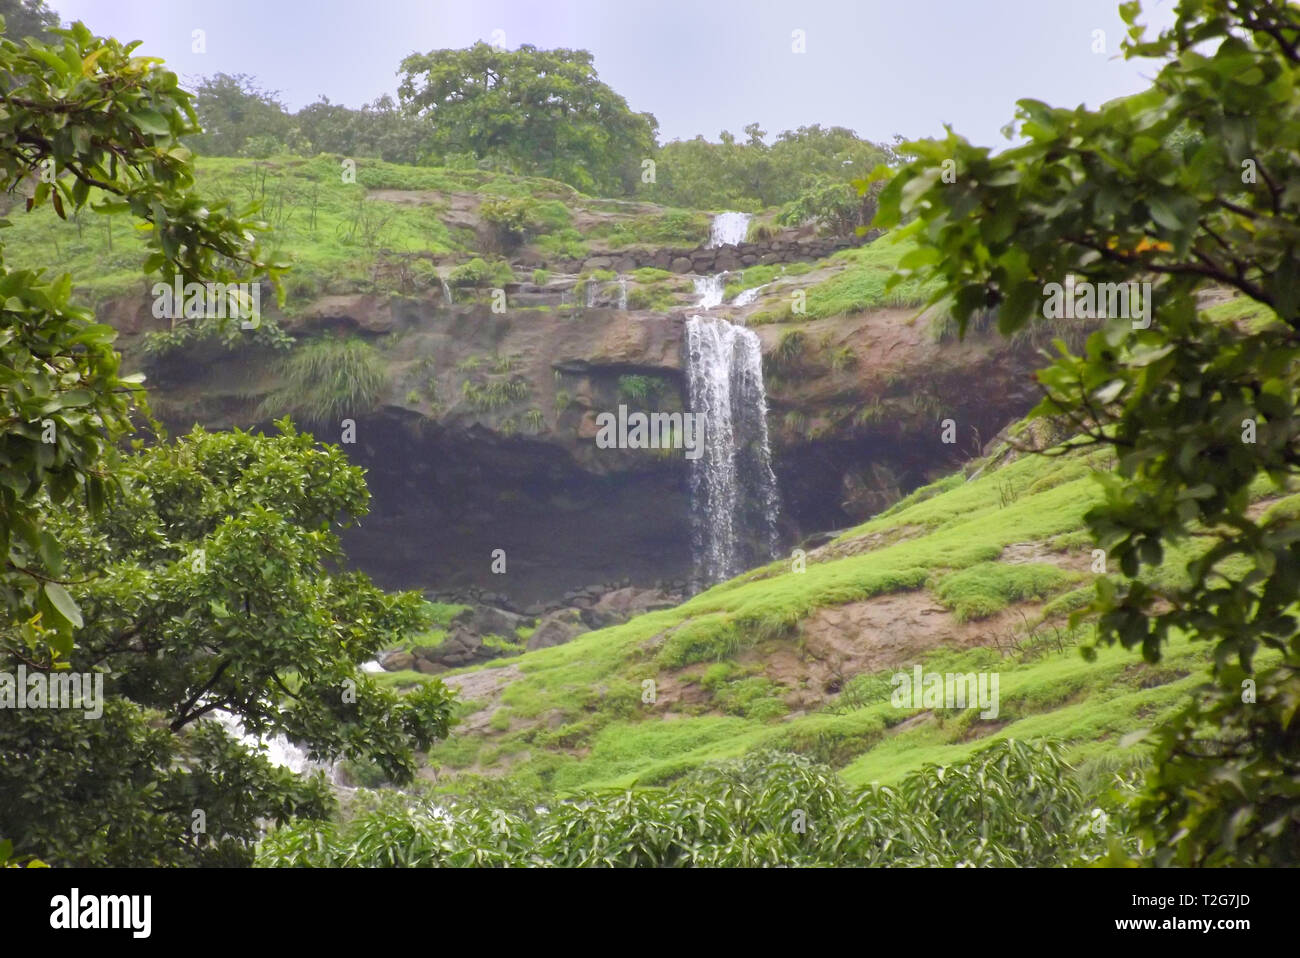 Natural waterfall surrounded by lush green vegetation Stock Photo